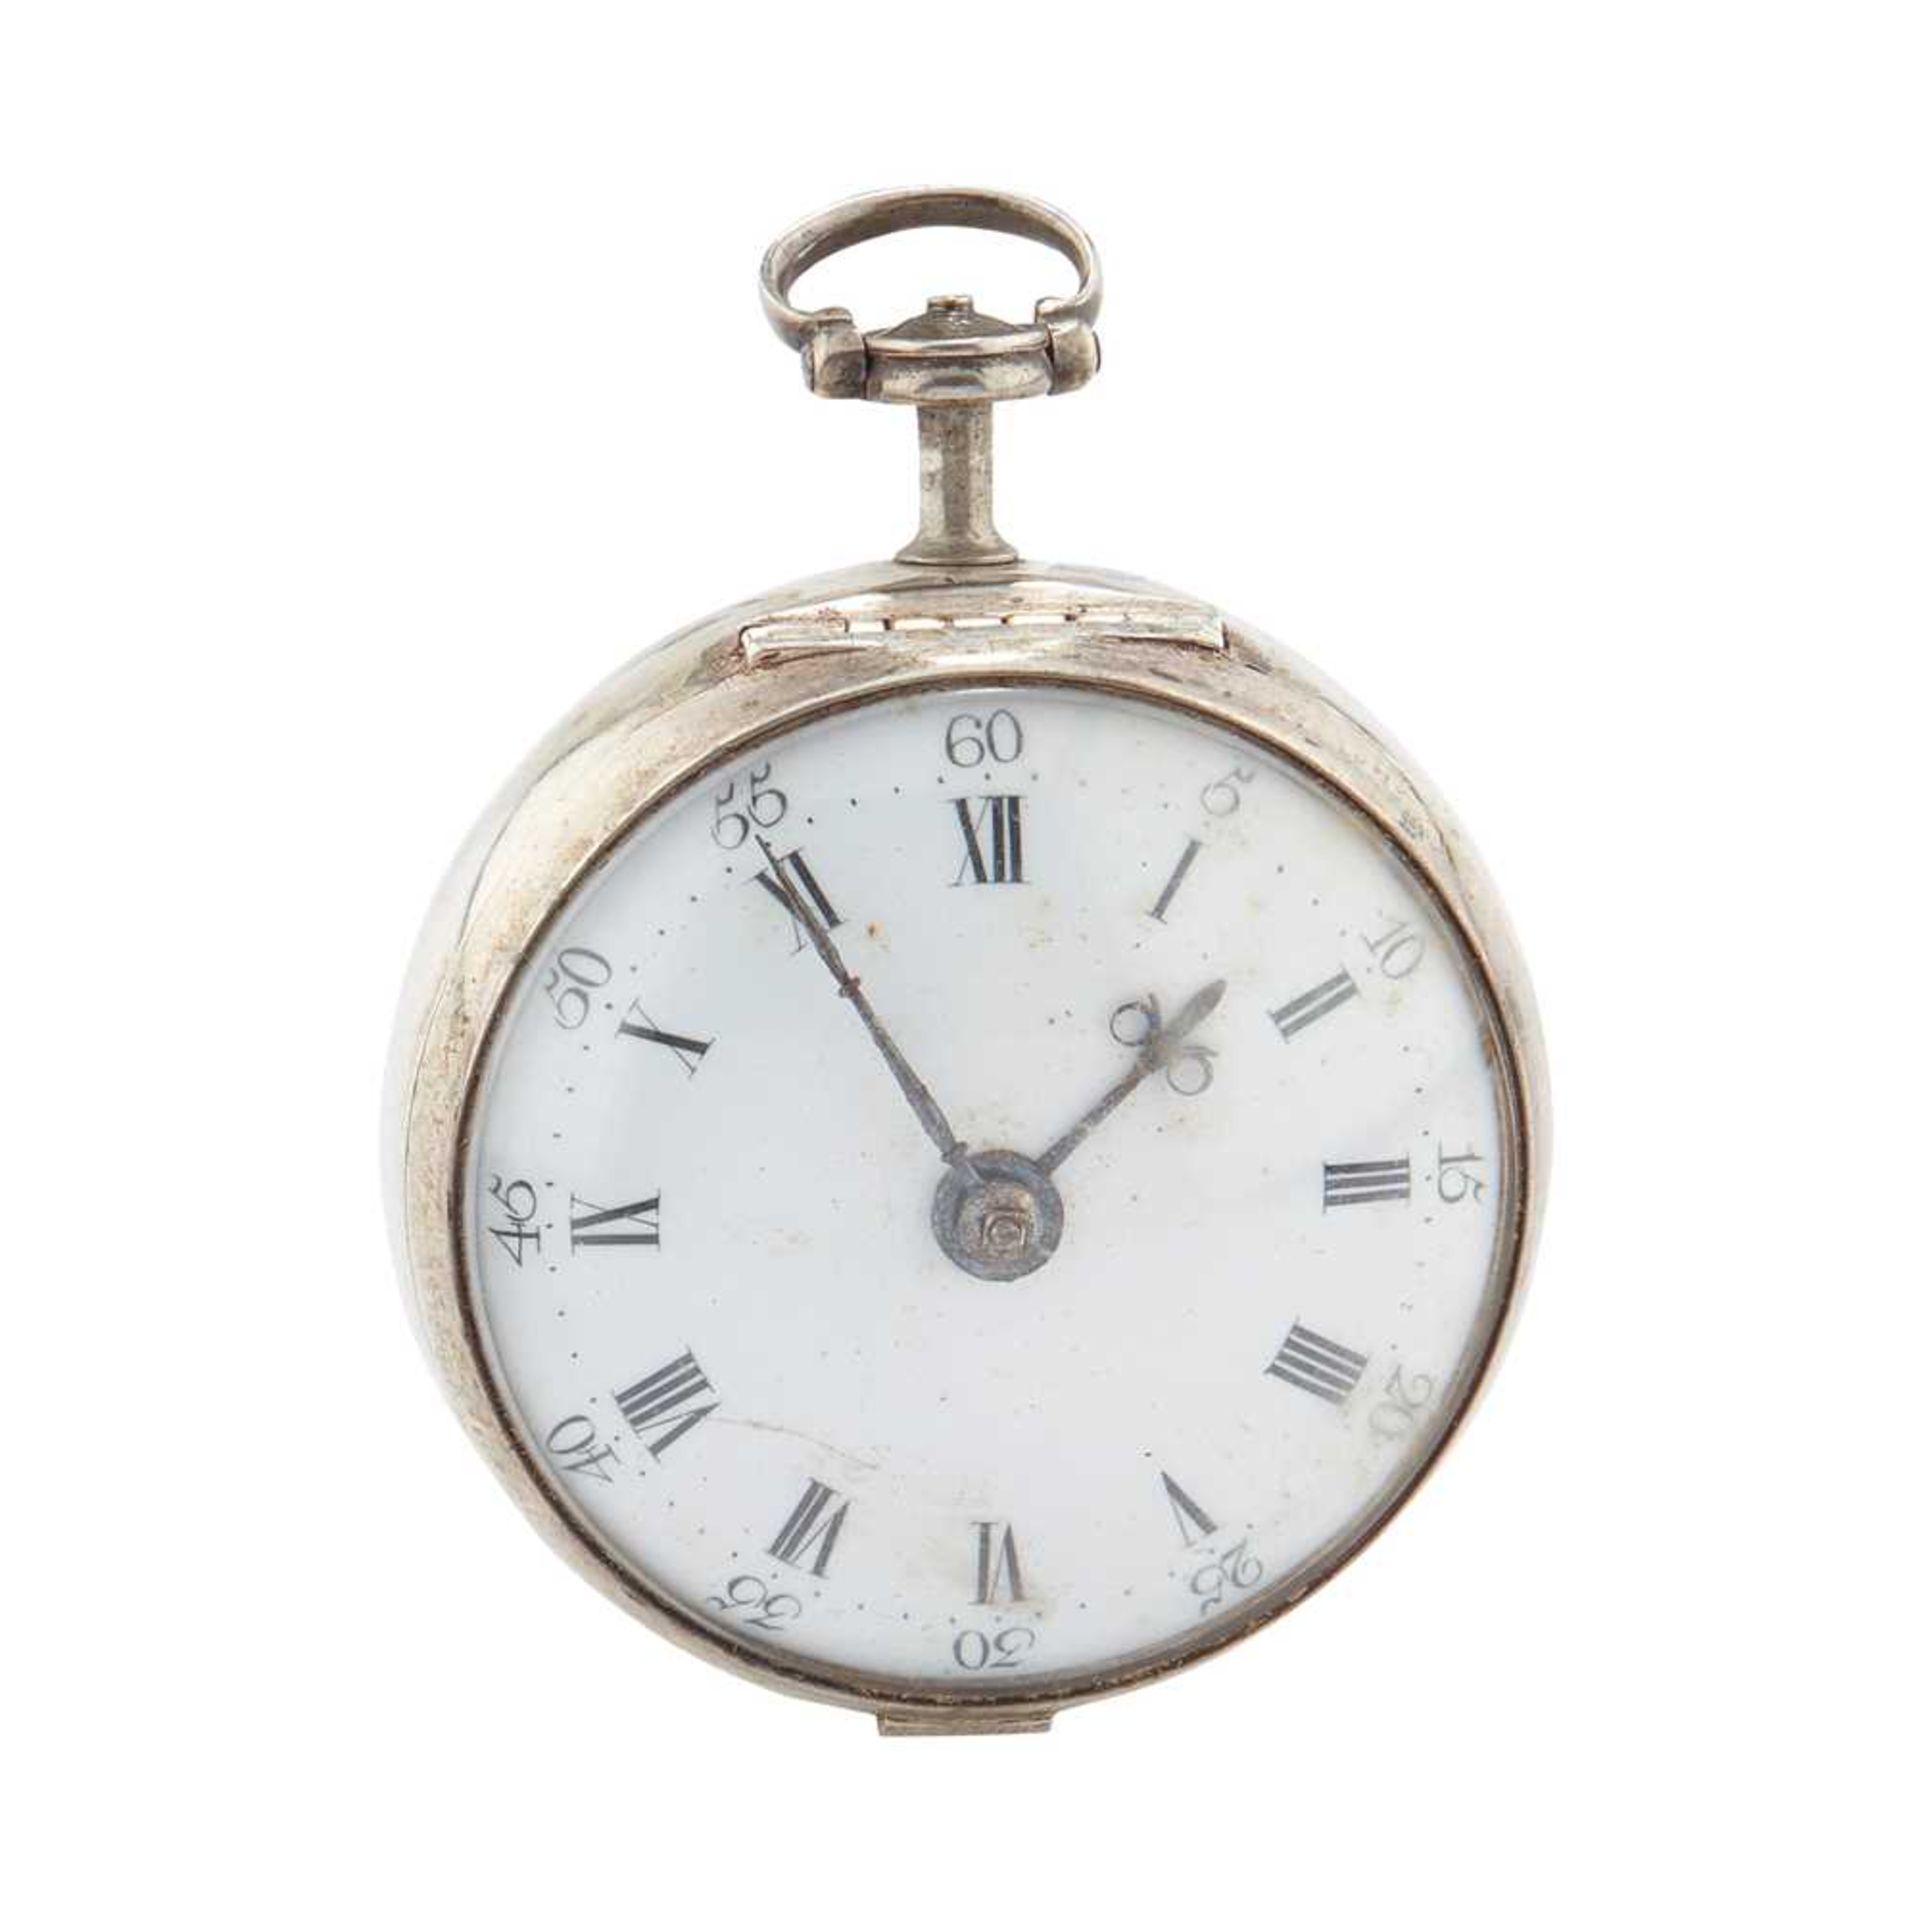 A LATE 18TH CENTURY SILVER PAIR CASED VERGE POCKET WATCH J. LYNDER, LONDON CIRCA 1781 - Image 2 of 3